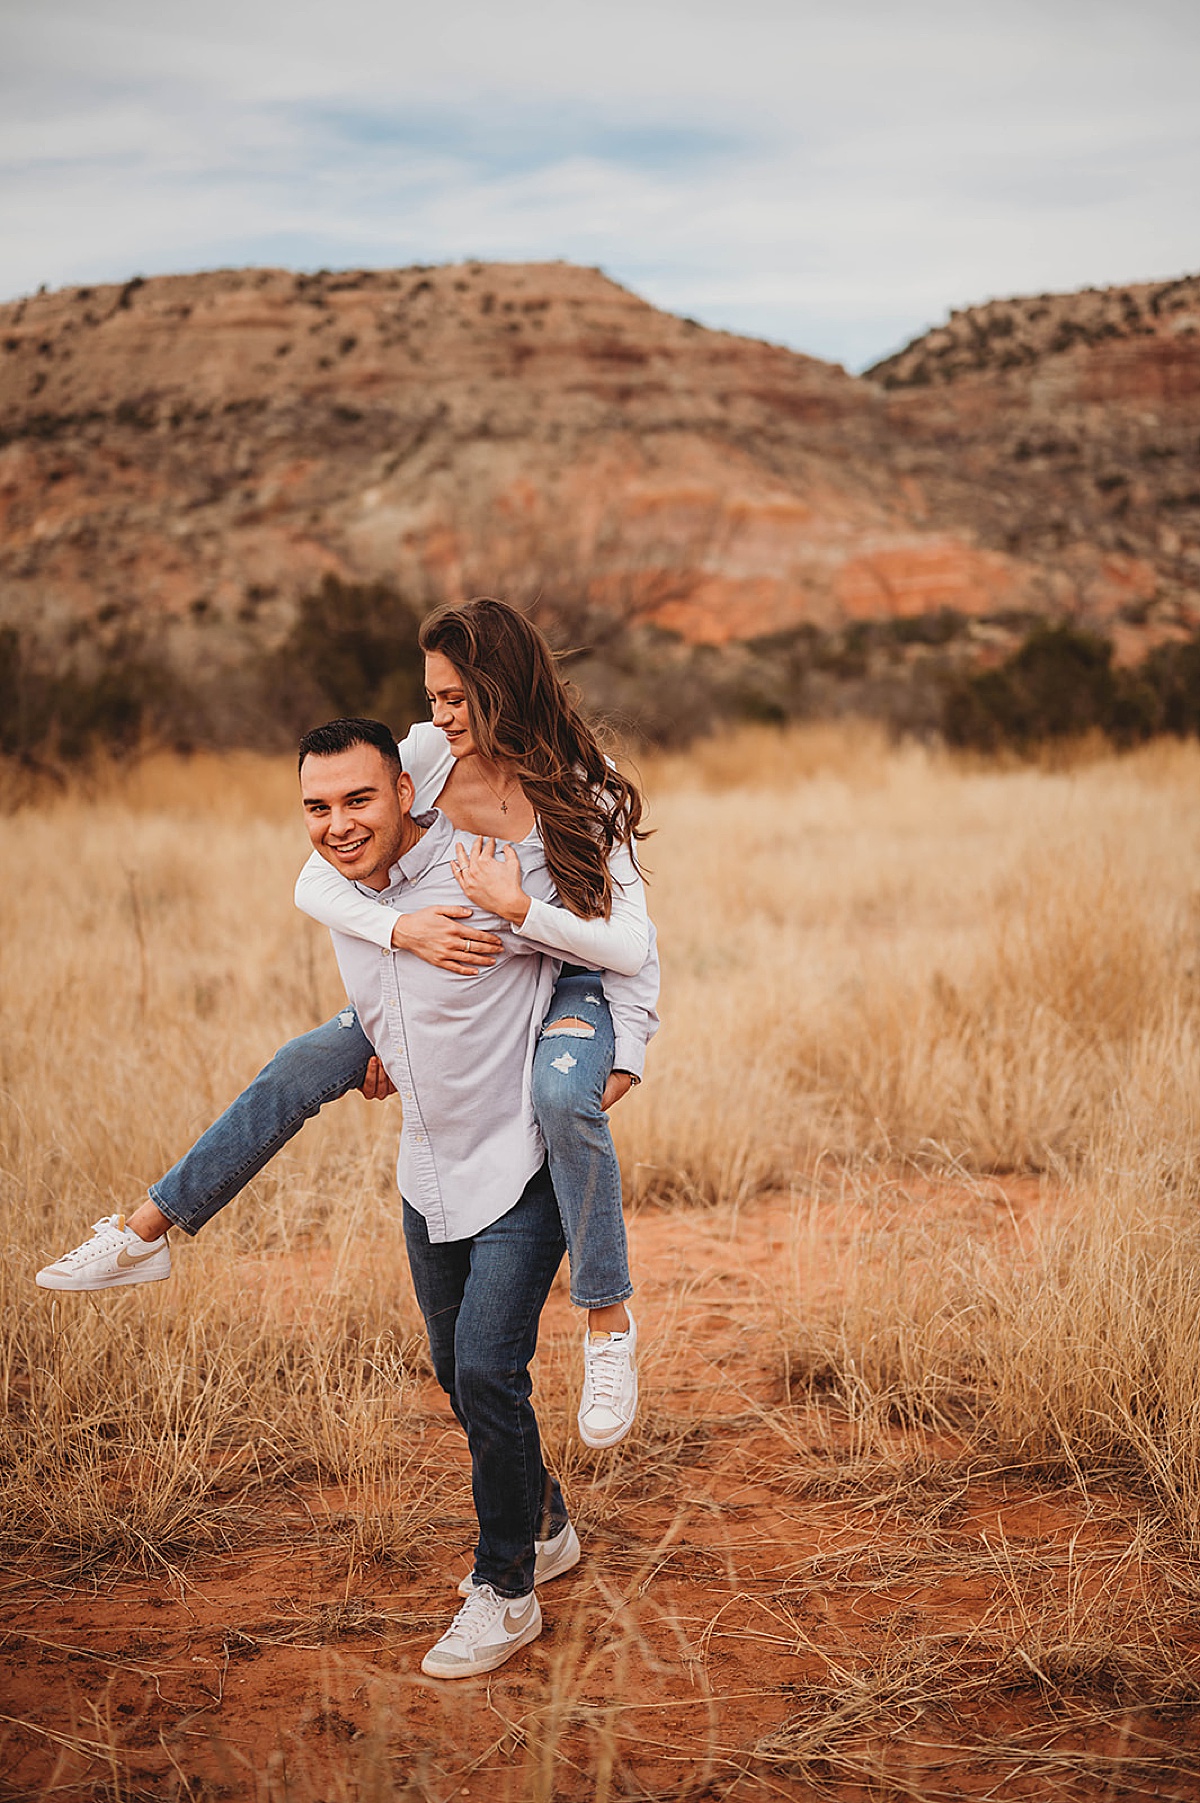 fiance gives his girl a piggy back ride during cute canyon adventure engagement shoot